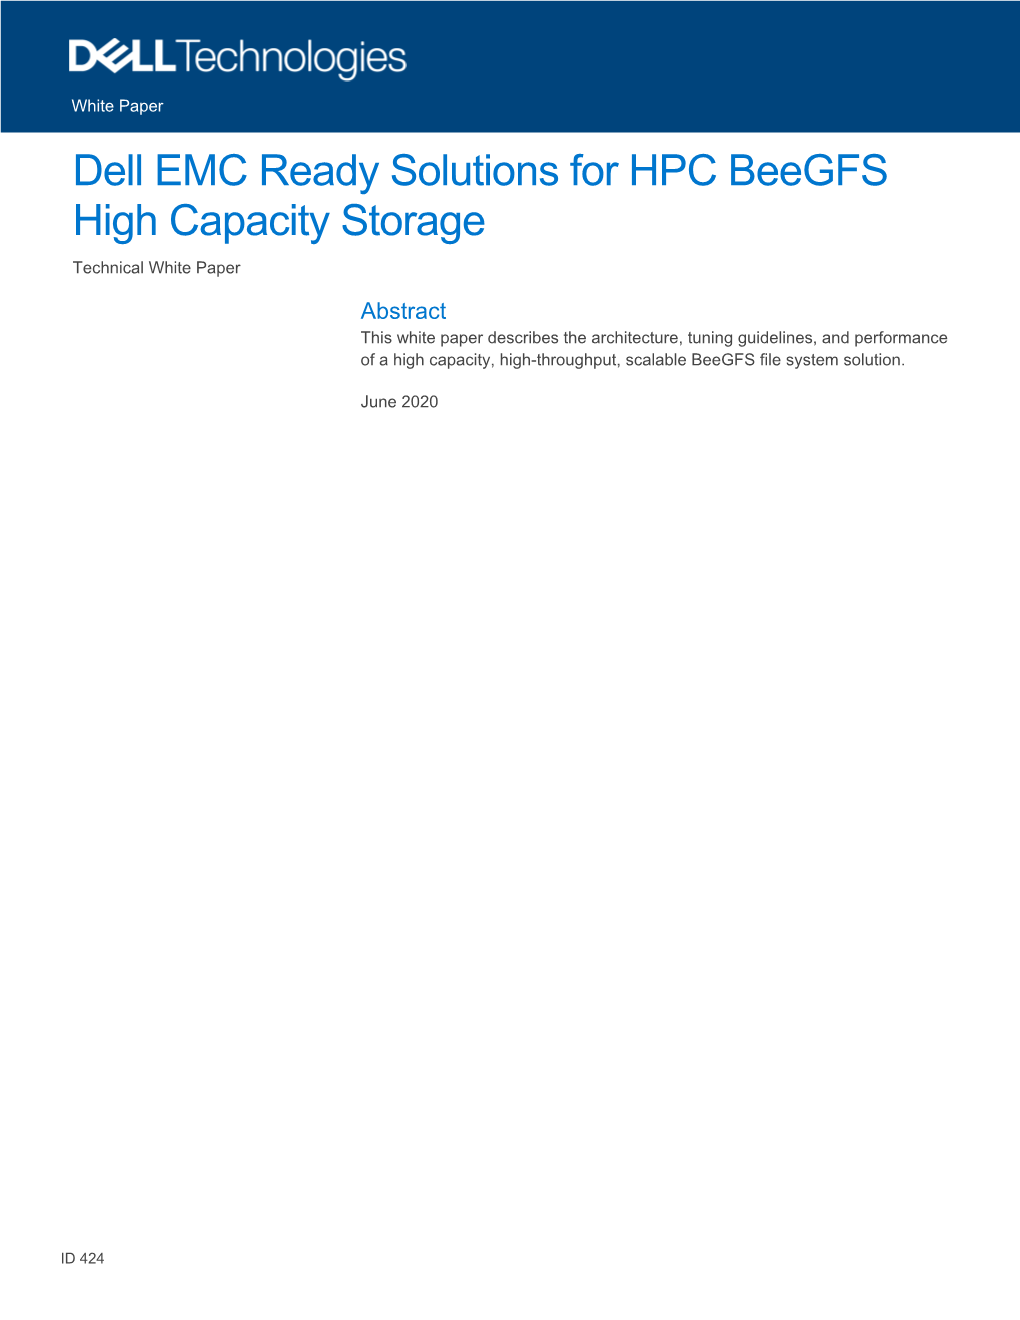 Dell EMC Ready Solution for HPC Beegfs High Capacity Storage